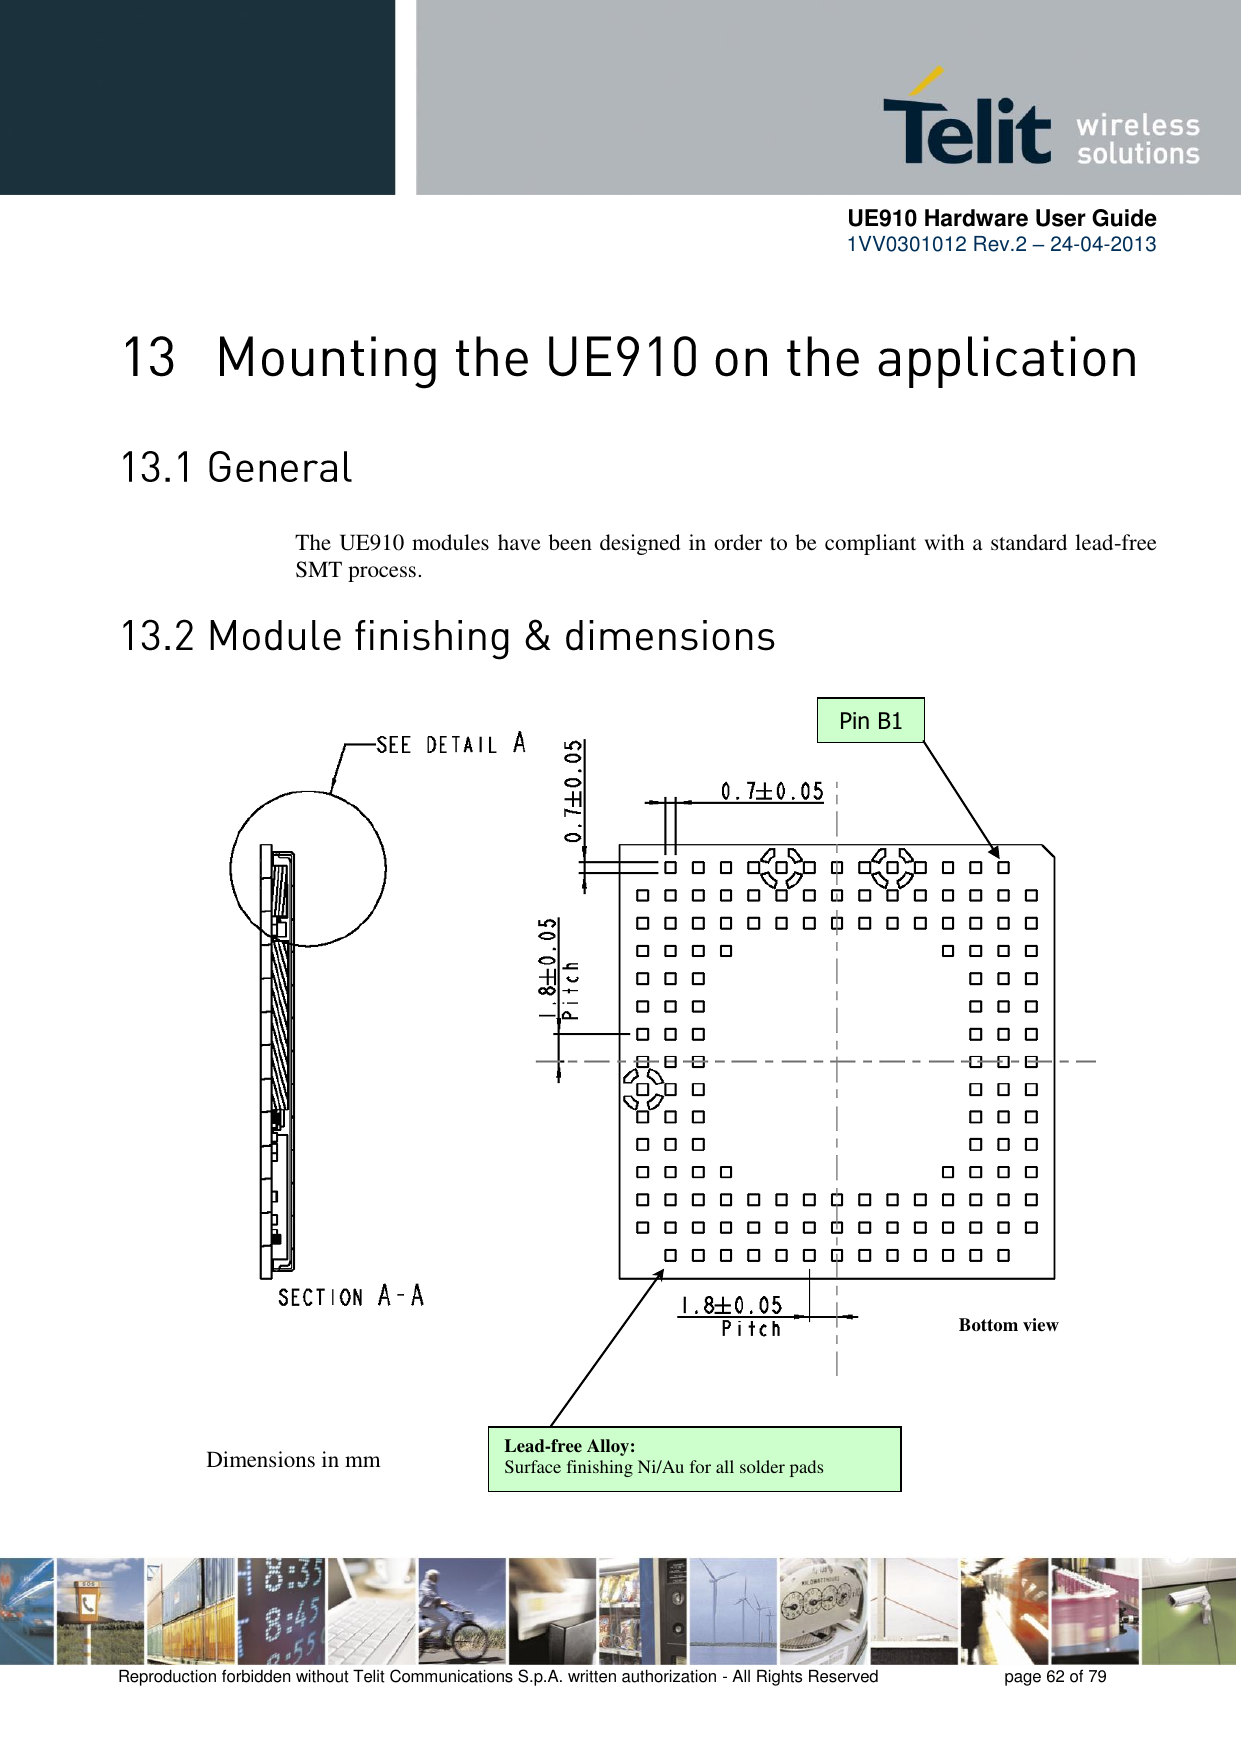      UE910 Hardware User Guide  1VV0301012 Rev.2 – 24-04-2013    Reproduction forbidden without Telit Communications S.p.A. written authorization - All Rights Reserved    page 62 of 79    The UE910 modules have been designed in order to be compliant with a standard lead-free SMT process.  Pin B1 Dimensions in mm Bottom view Lead-free Alloy: Surface finishing Ni/Au for all solder pads  